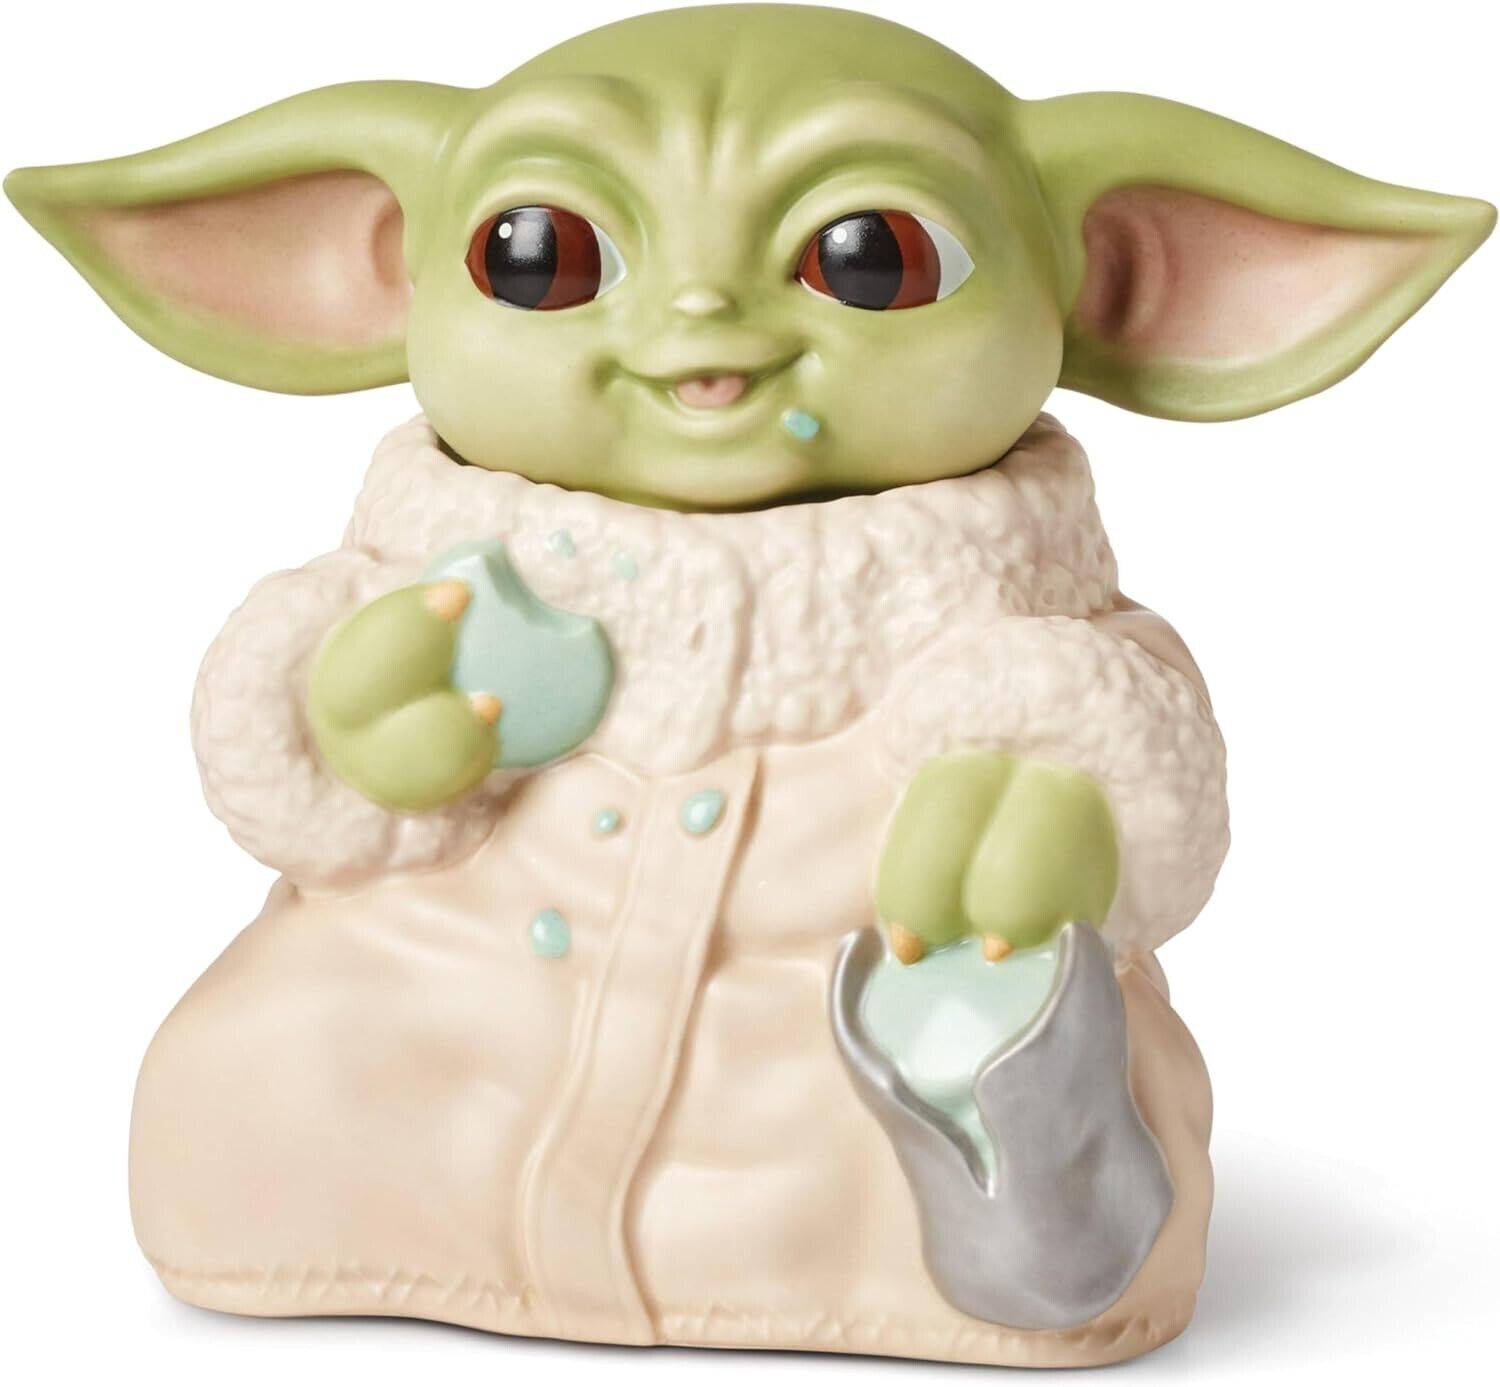 Calling all Star Wars Fans This adorable new Grogu Cookie Jar needs a new home